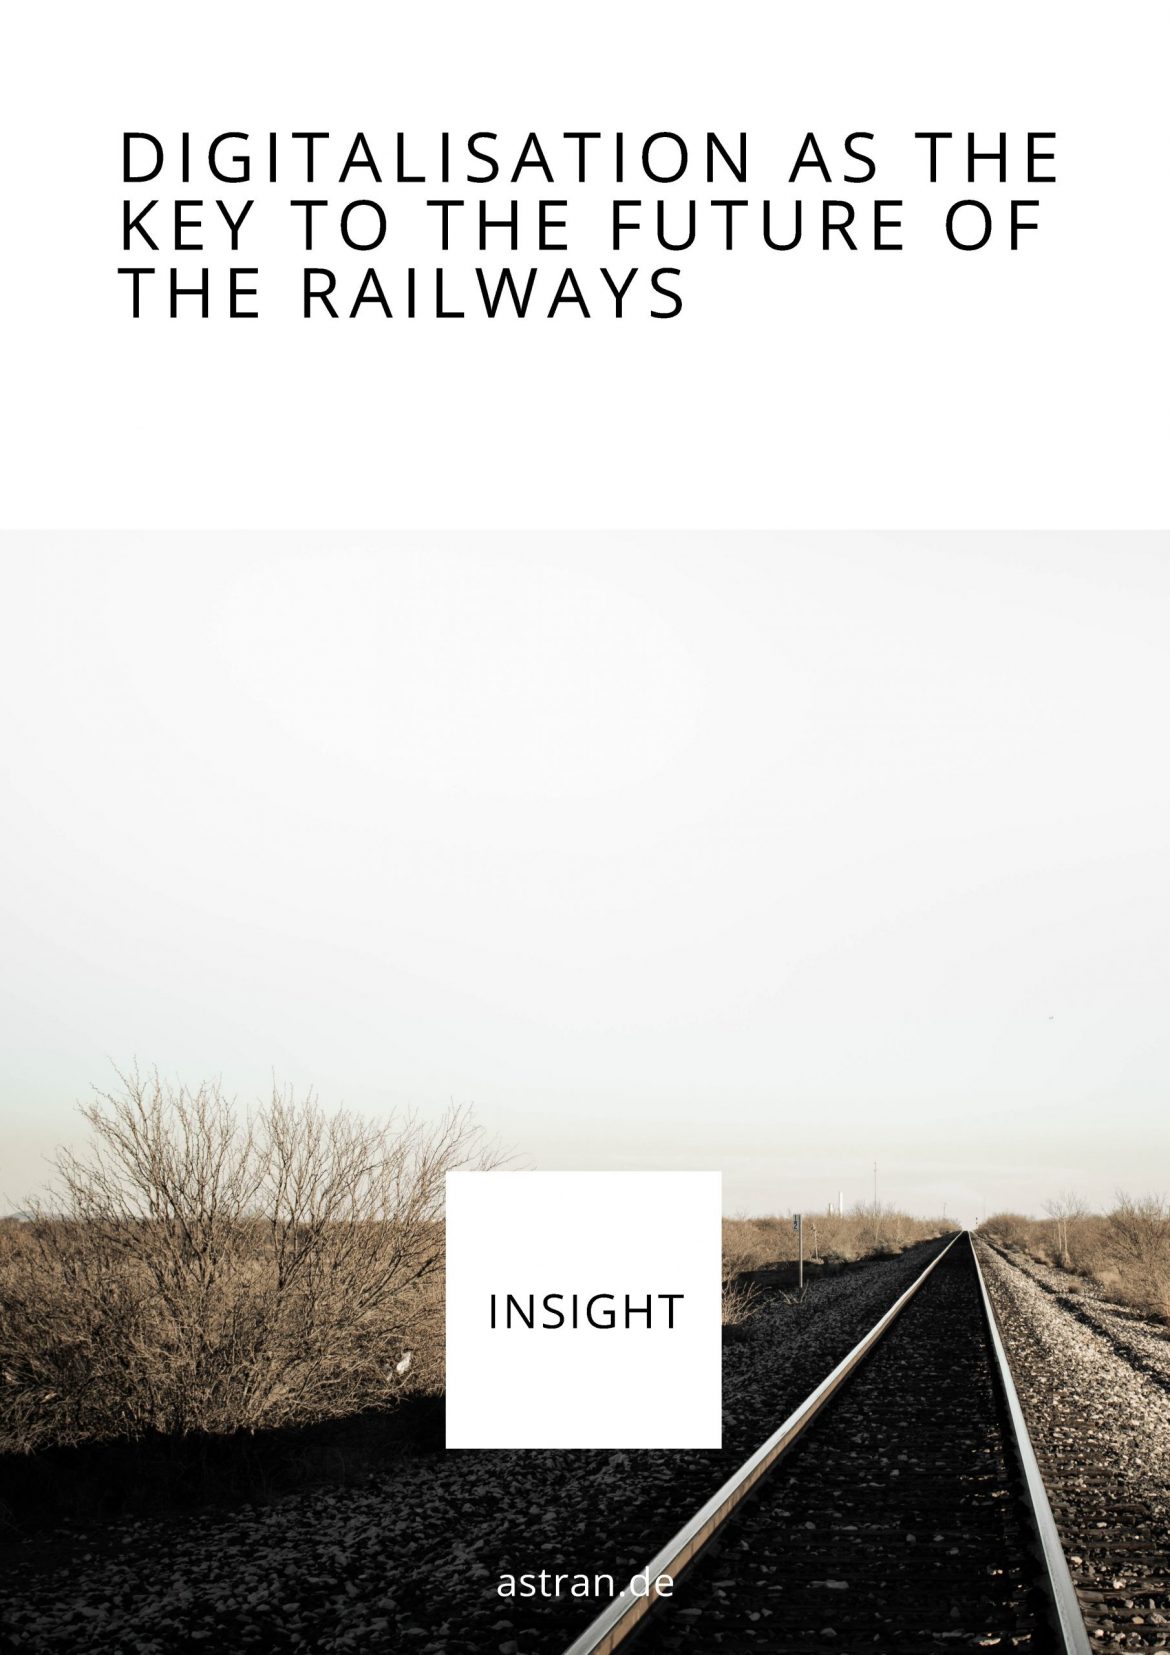 Digitalisation as the key to the future of the railways